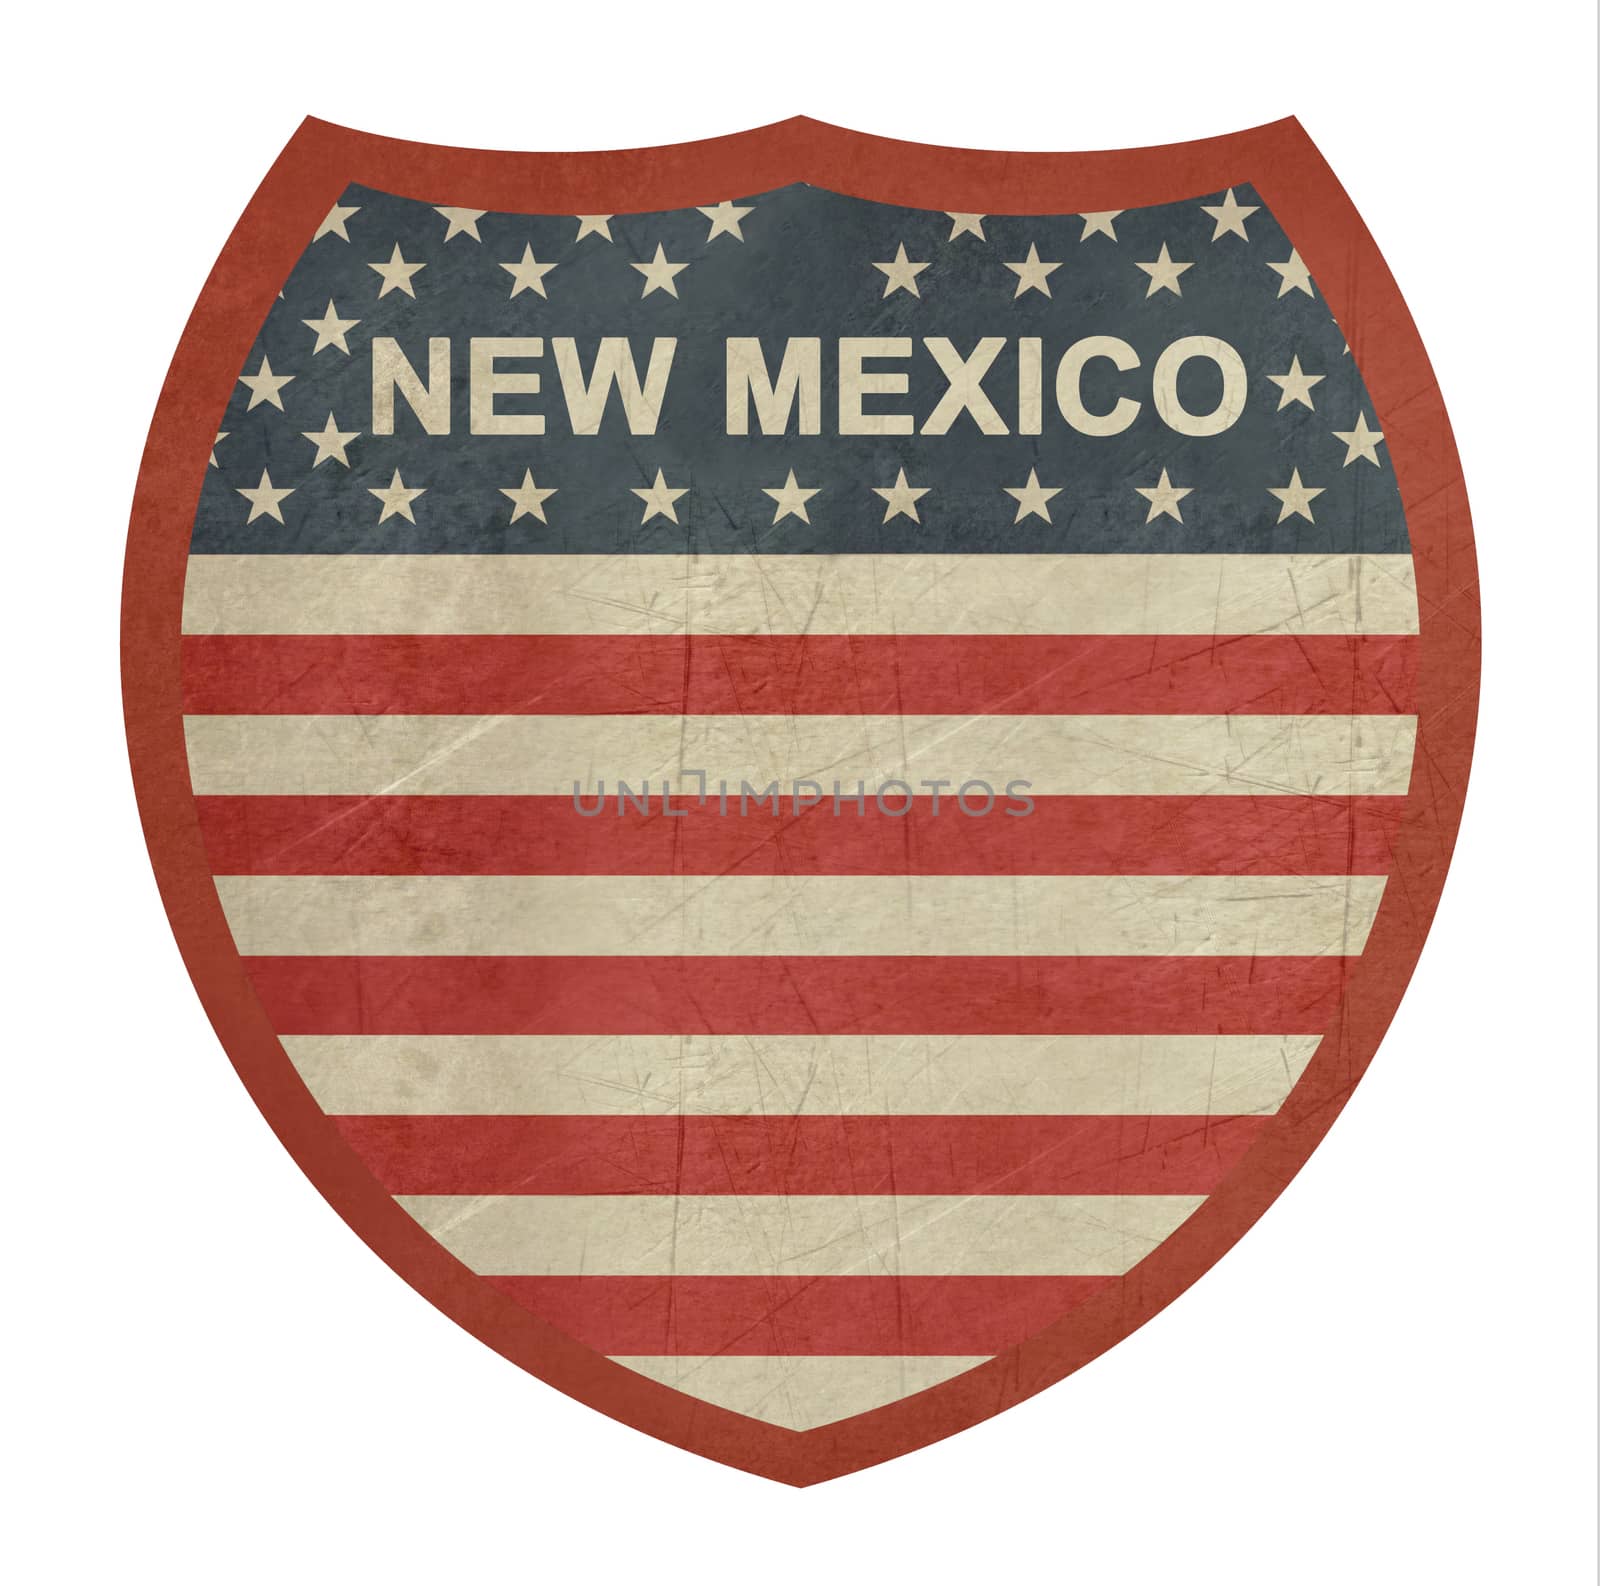 Grunge New Mexico American interstate highway sign by speedfighter